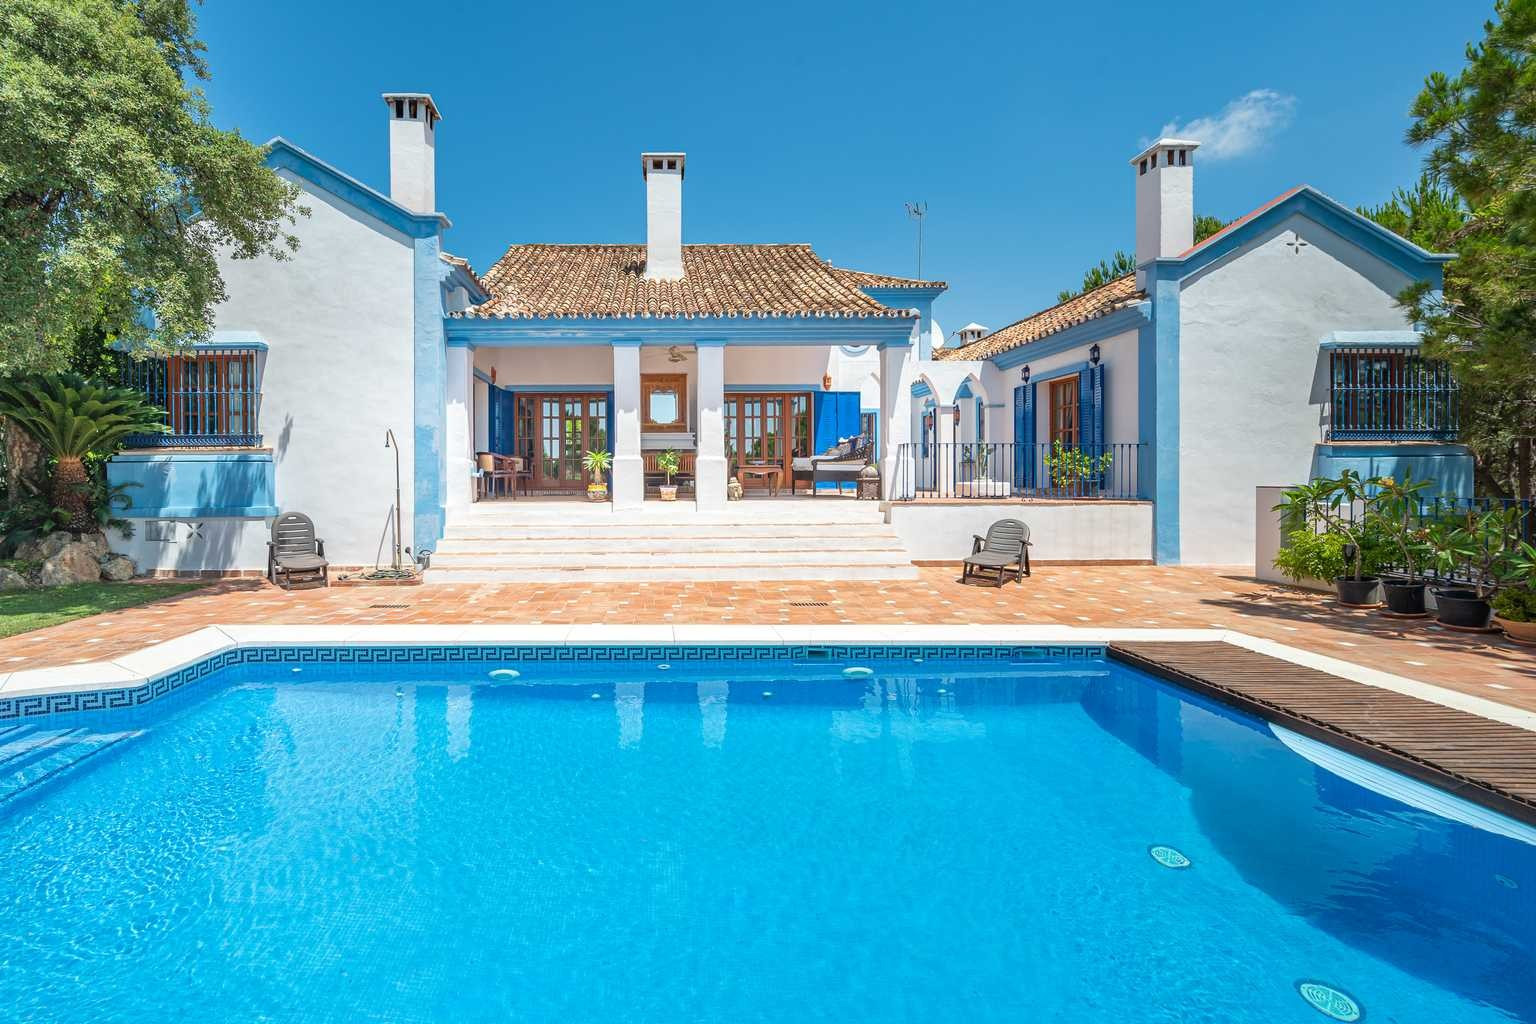 Rustic and well-kept villa located in Monte Mayor, a beautiful residential estate within the Ronda mountains